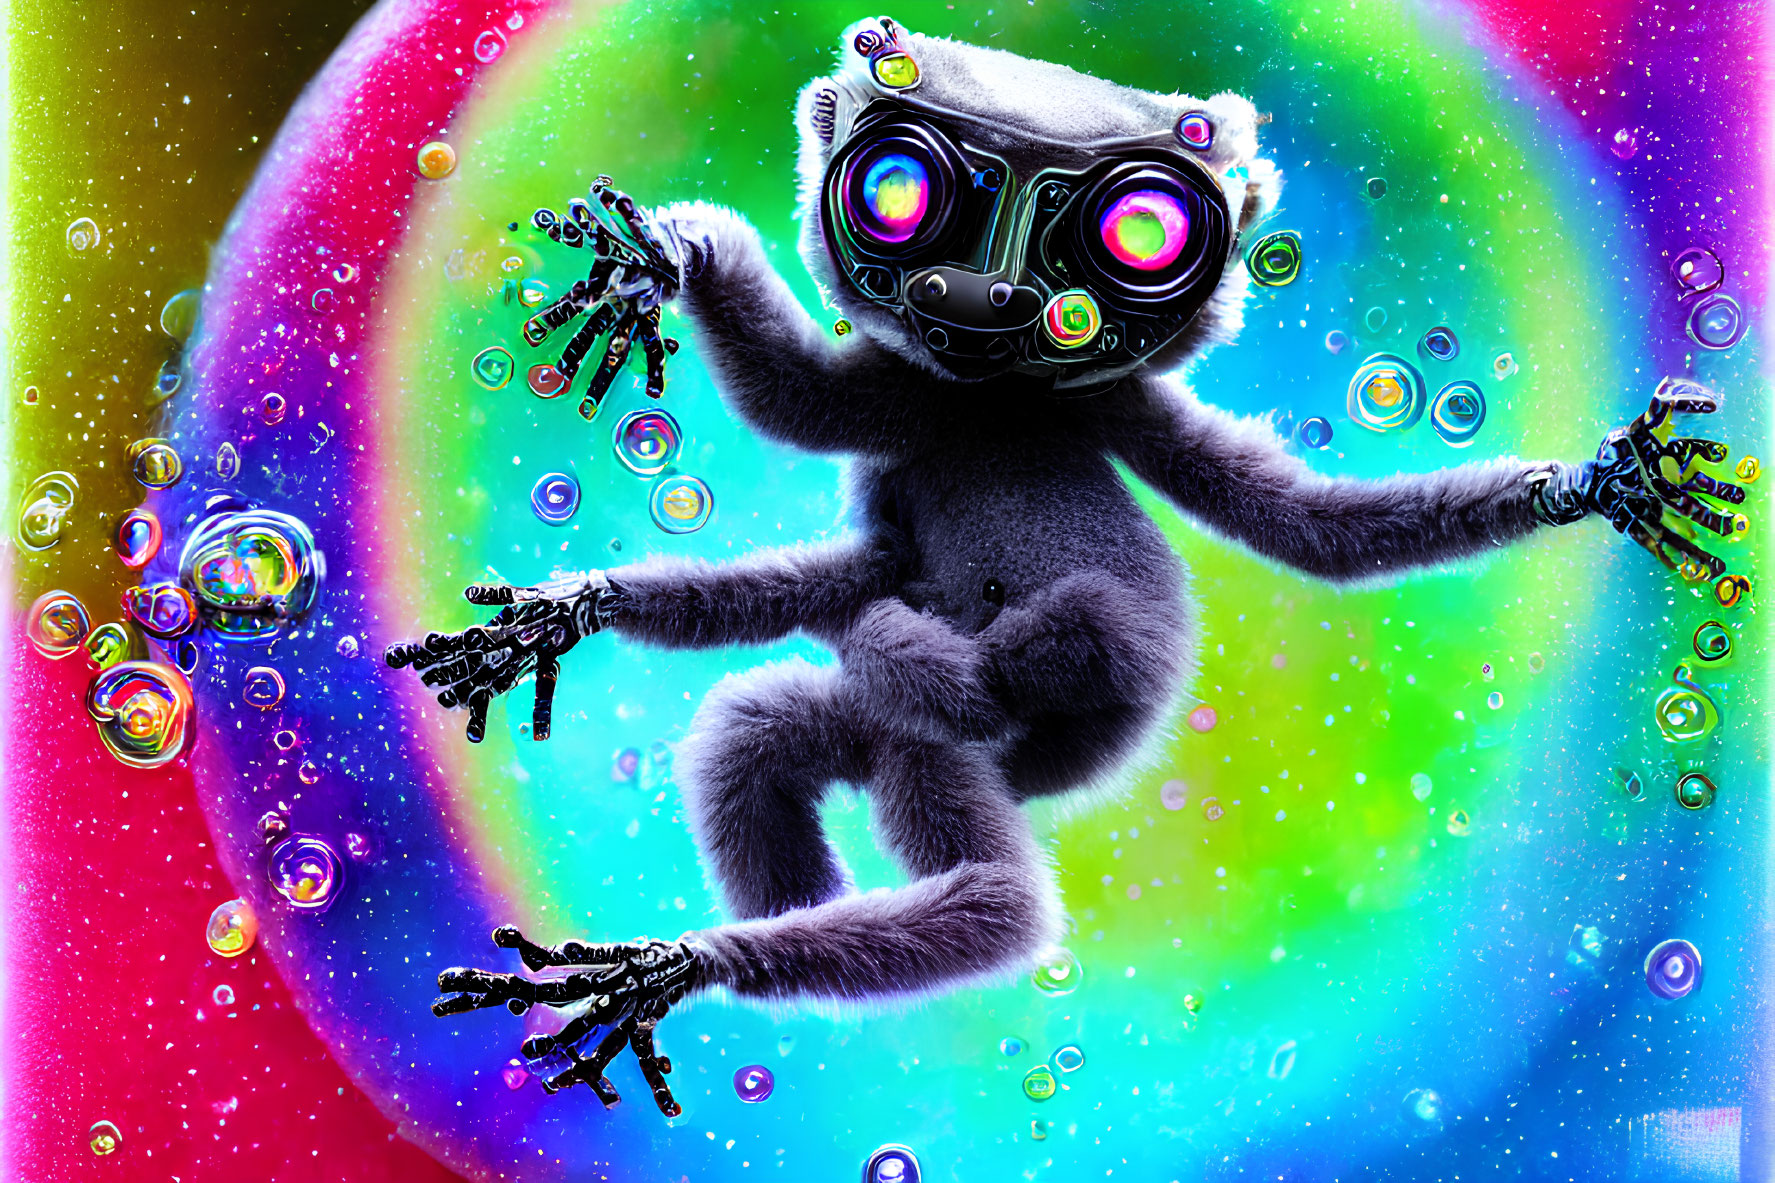 Imaginative creature with robotic arms and eyes in colorful, psychedelic setting